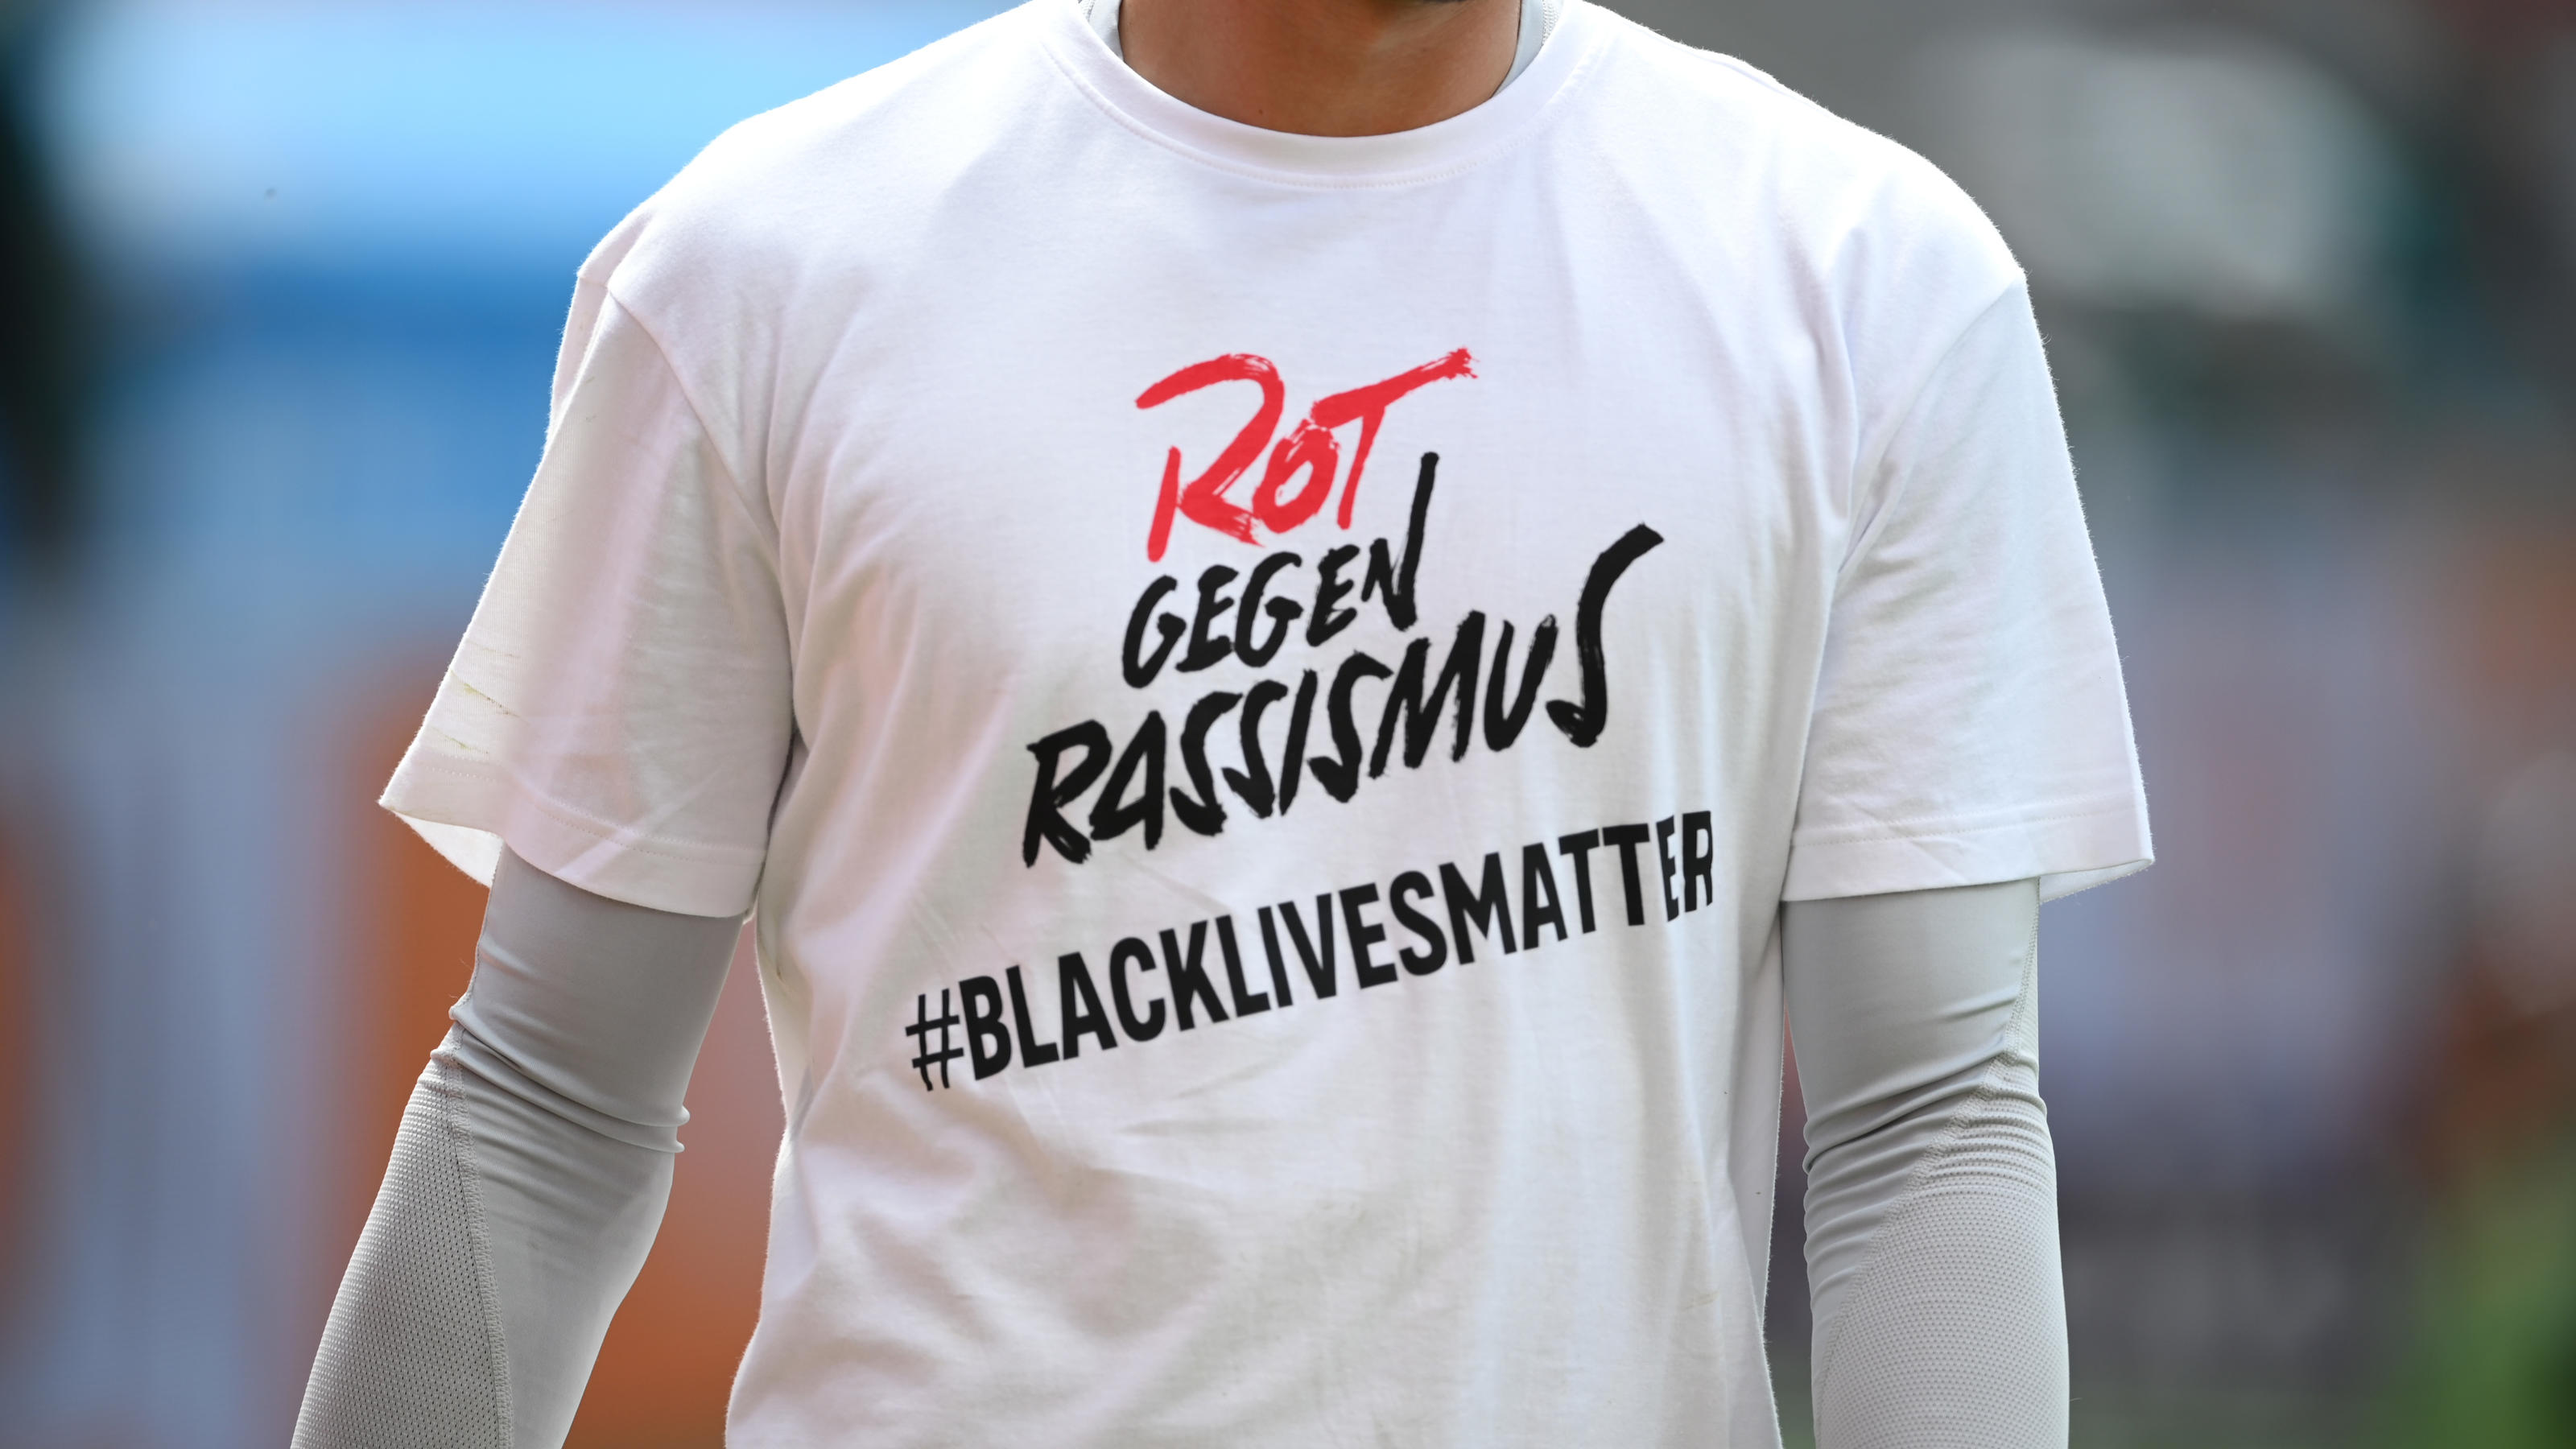 LEVERKUSEN, GERMANY - JUNE 06: Goalkeeper Manuel Neuer of Muenchen weras a shirt with a message reading 'Red against racism 'blacklivesmatter' as he warms up for the Bundesliga match between Bayer 04 Leverkusen and FC Bayern Muenchen at BayArena on J